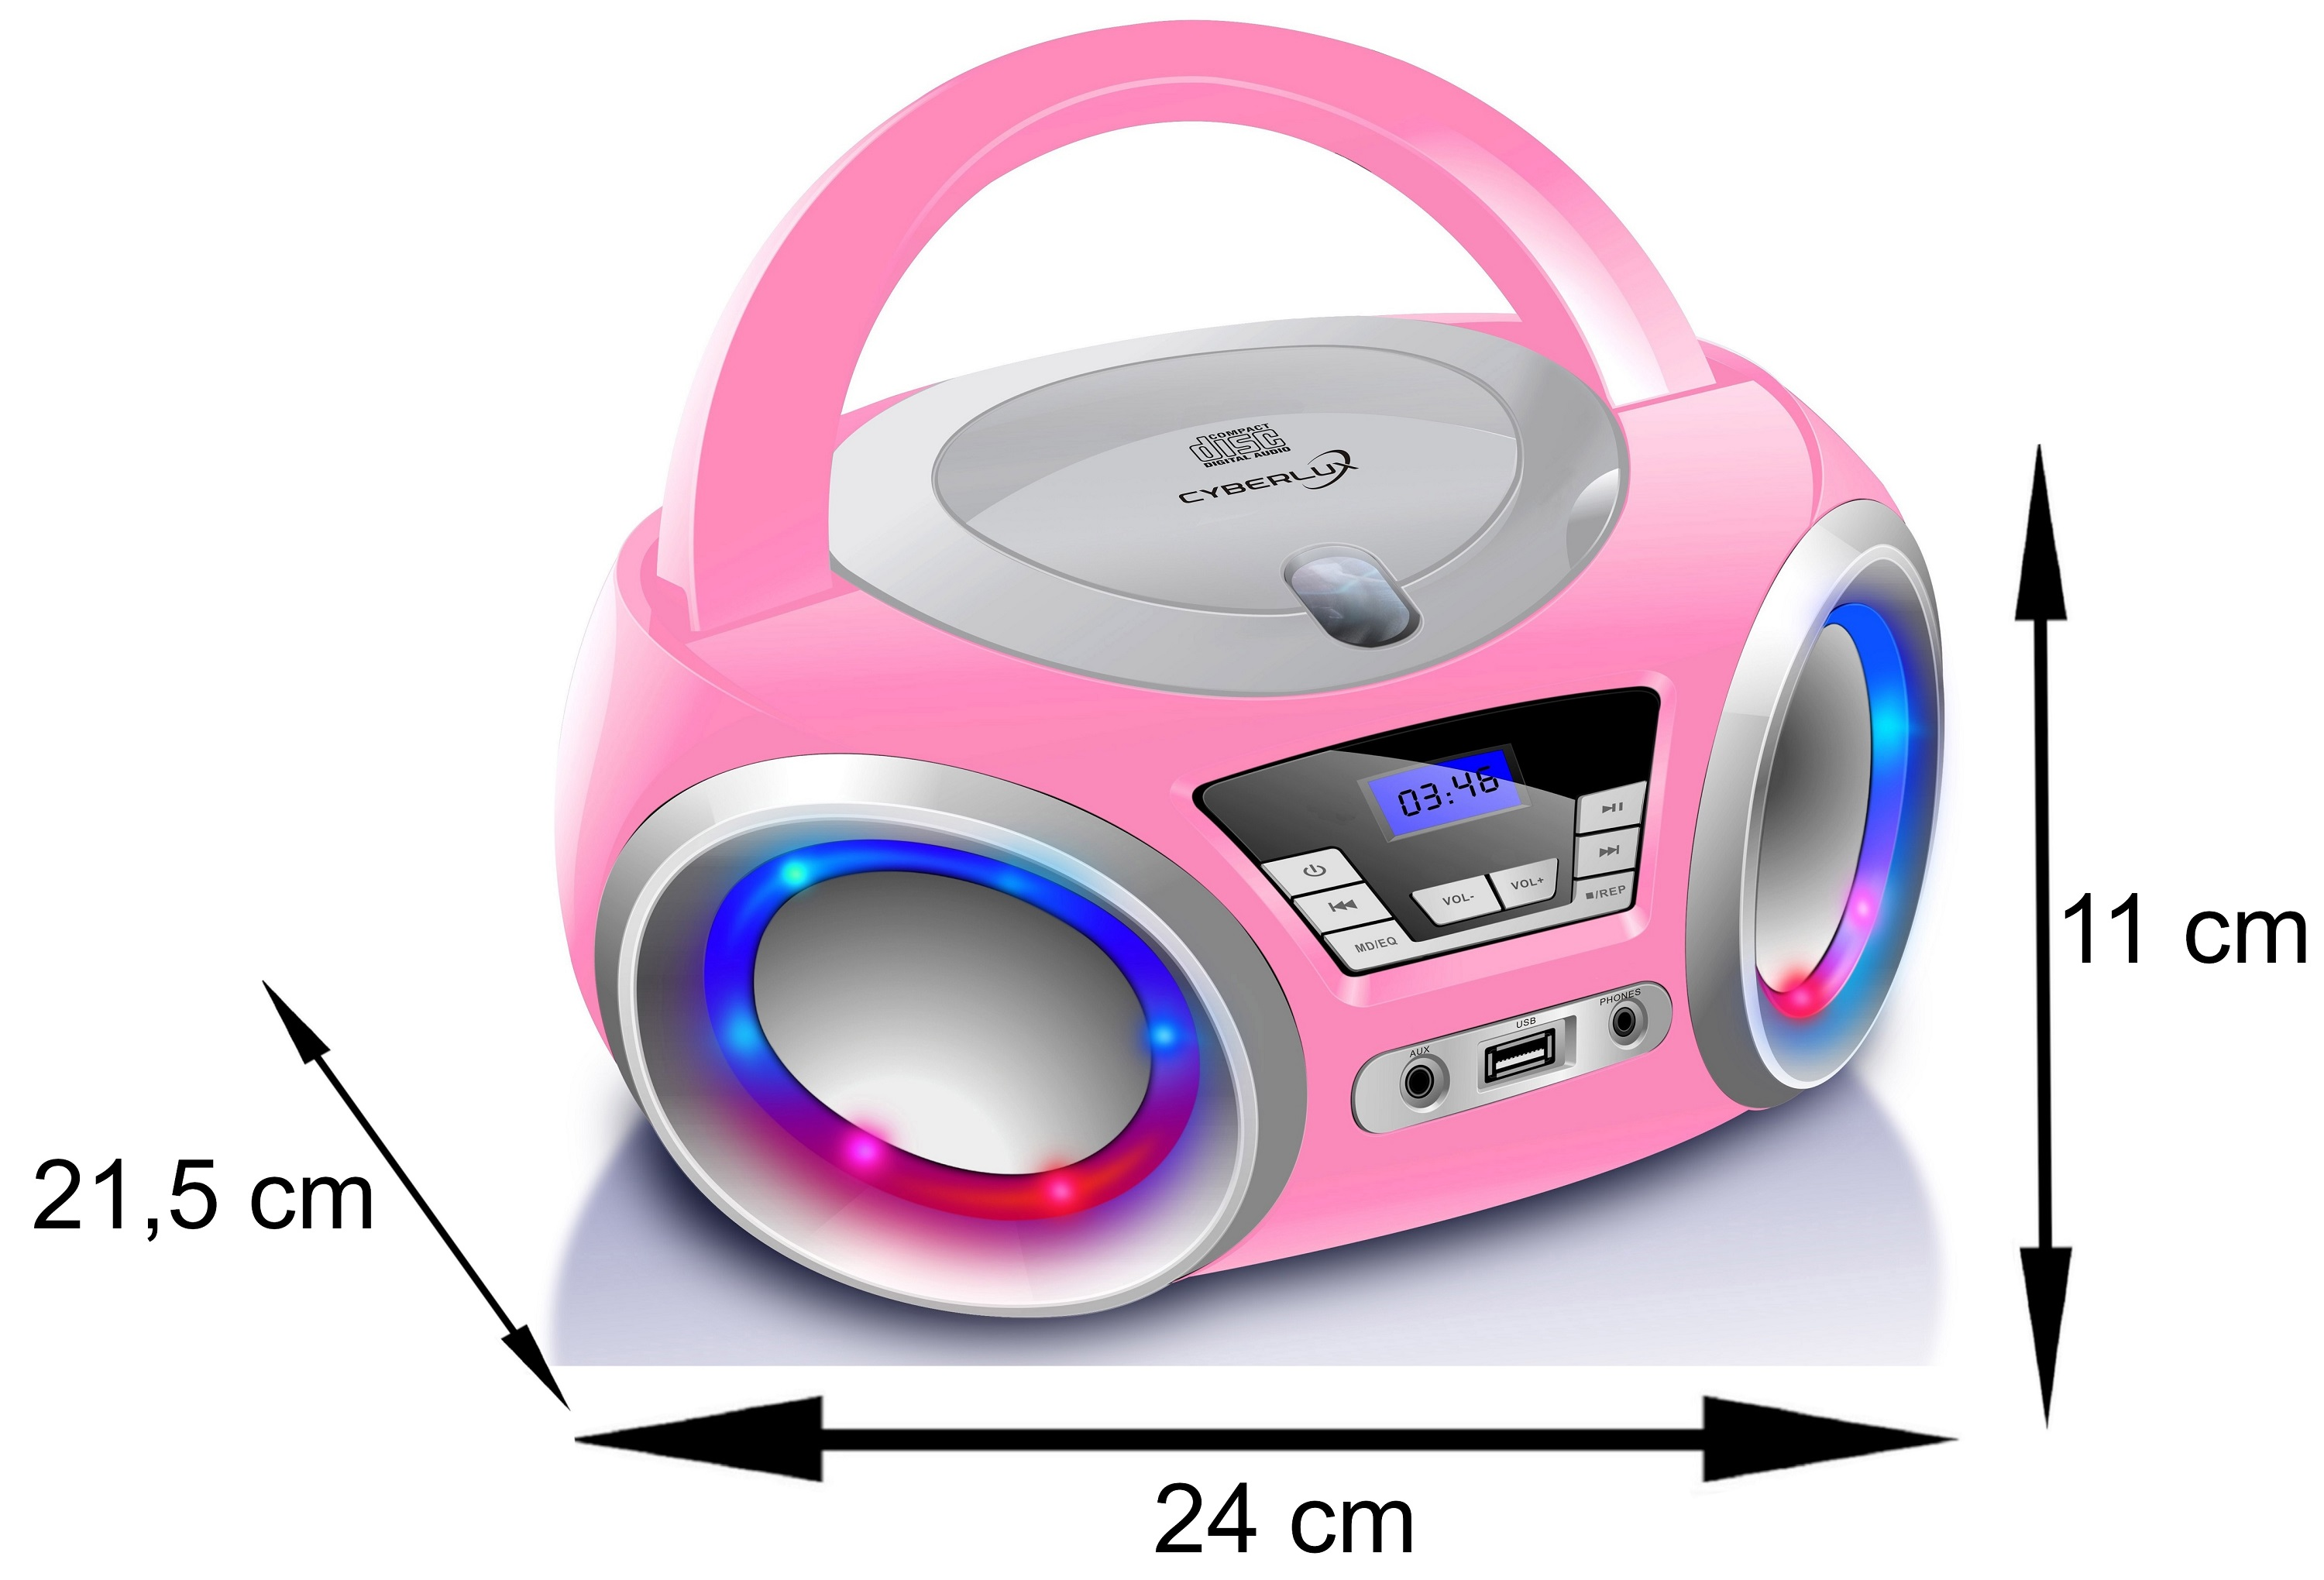 CL-910 Tragbares | Radio Loopy LED-Beleuchtung Pink | Kopfhöreranschluss CYBERLUX CD-Player Stereo mit